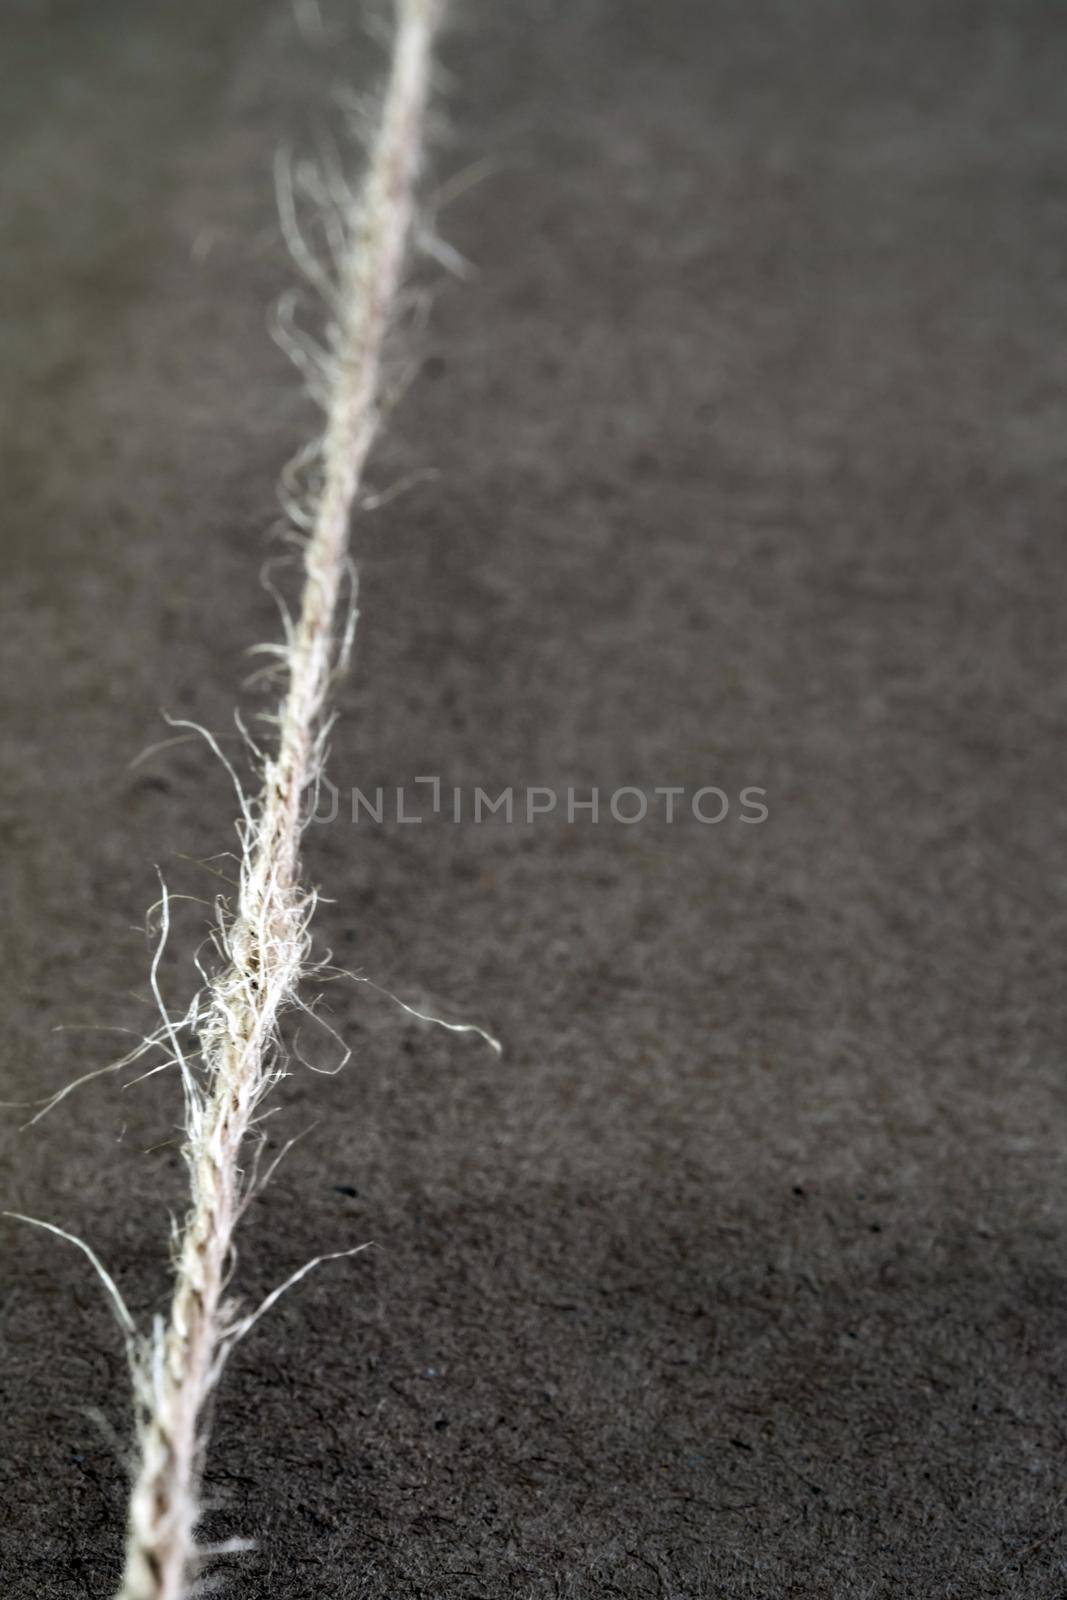 The natural rustic hemp cord was pulled straight line